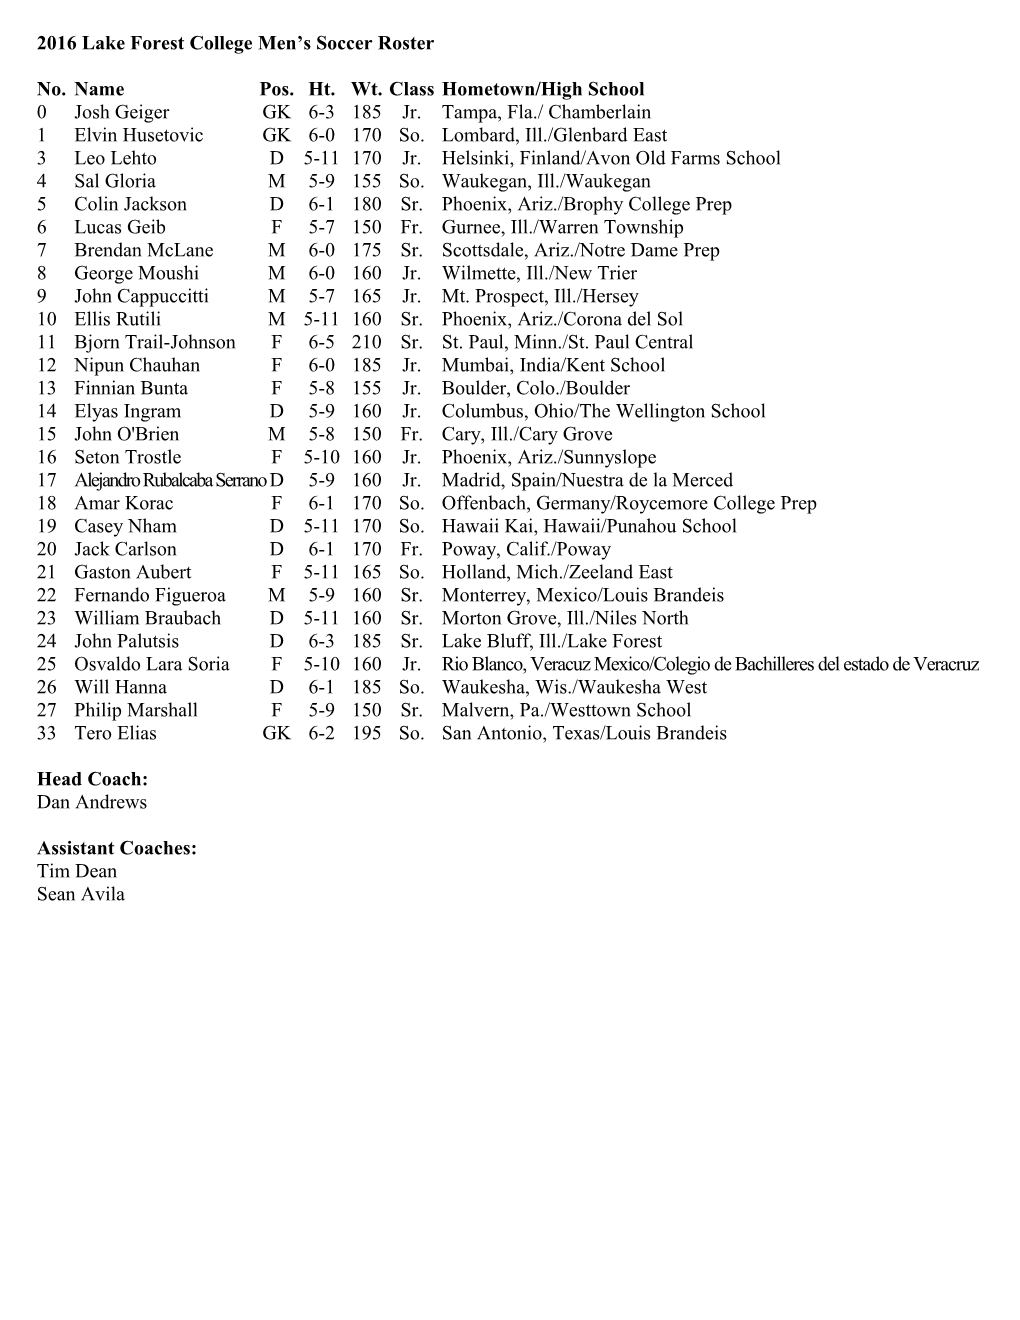 2007 Lake Forest College Football Roster